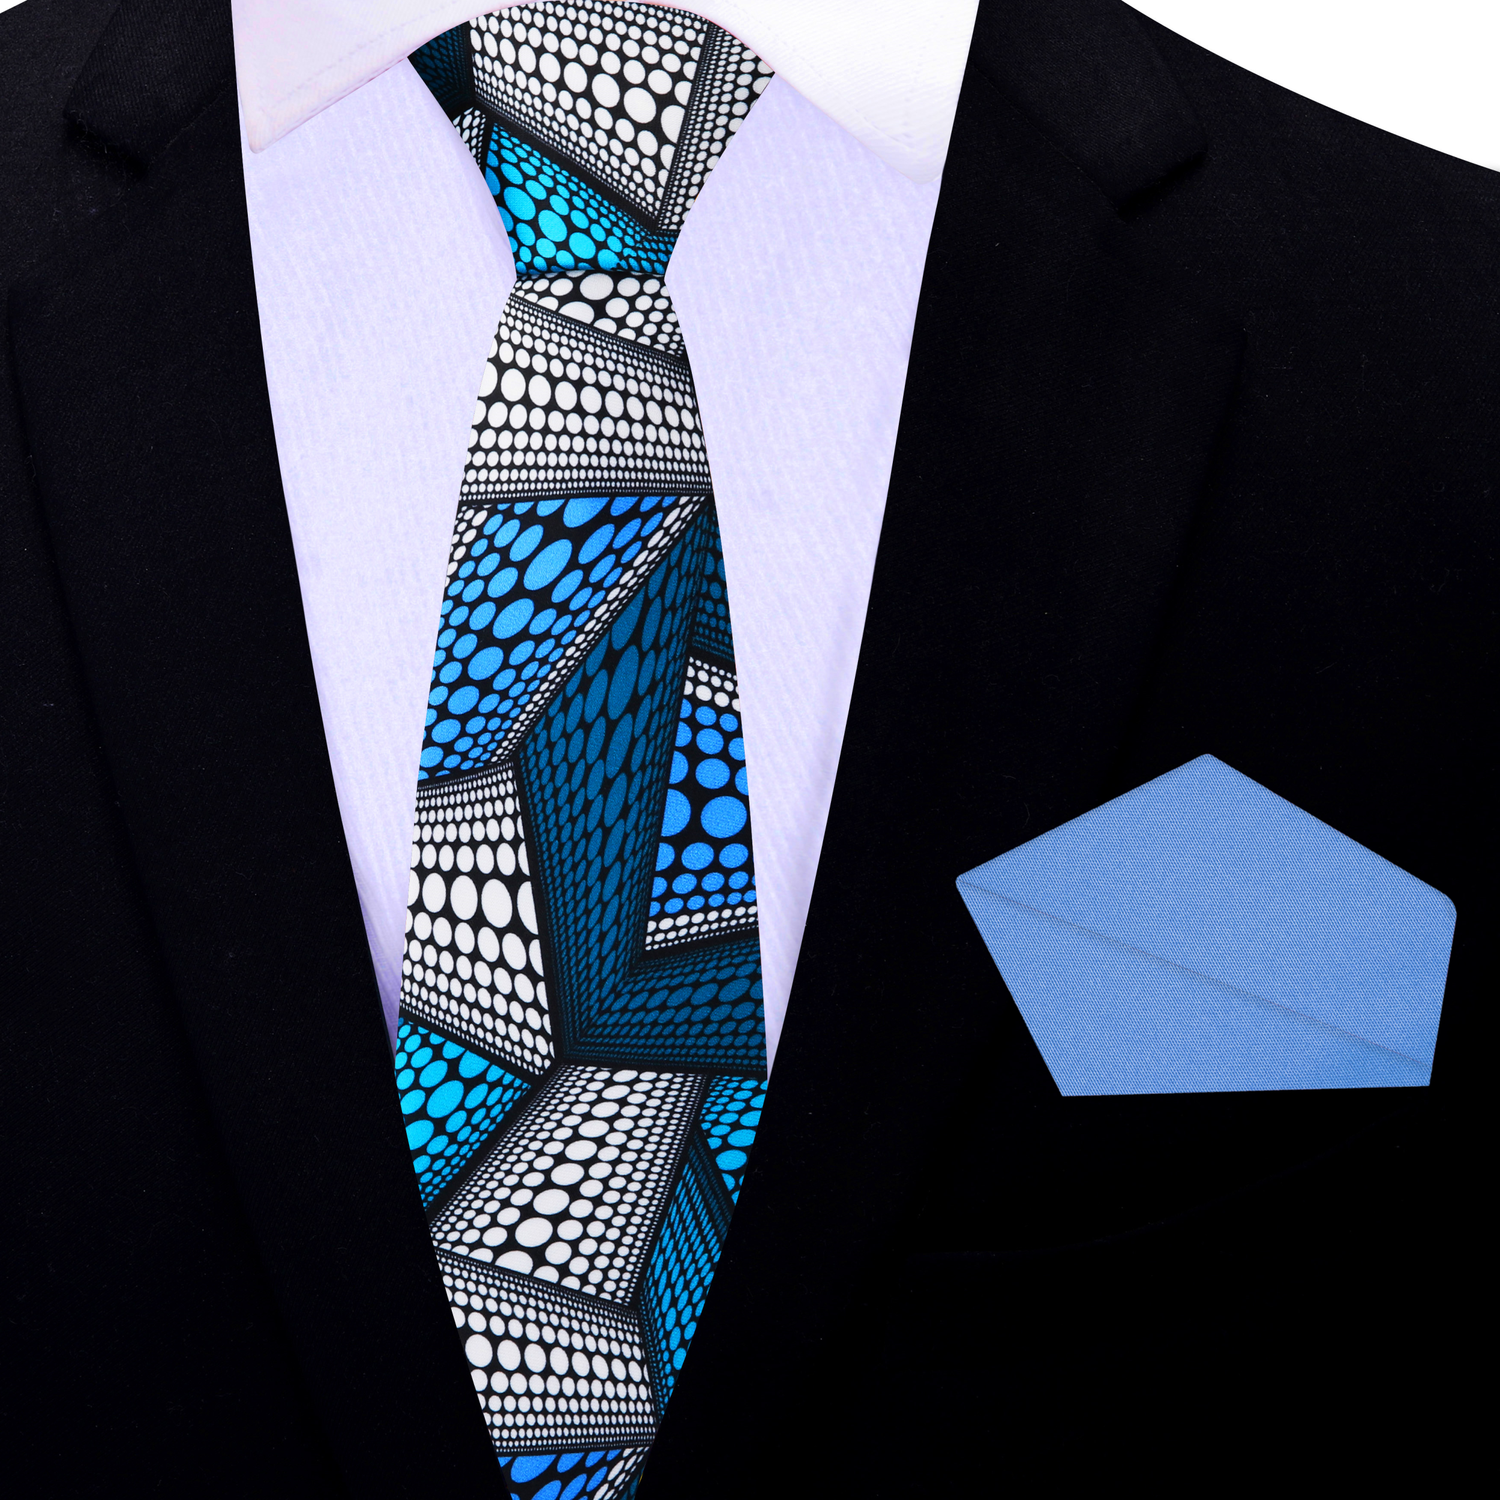 Thin Tie: An Abstract Blue and White Necktie and Light Blue Square